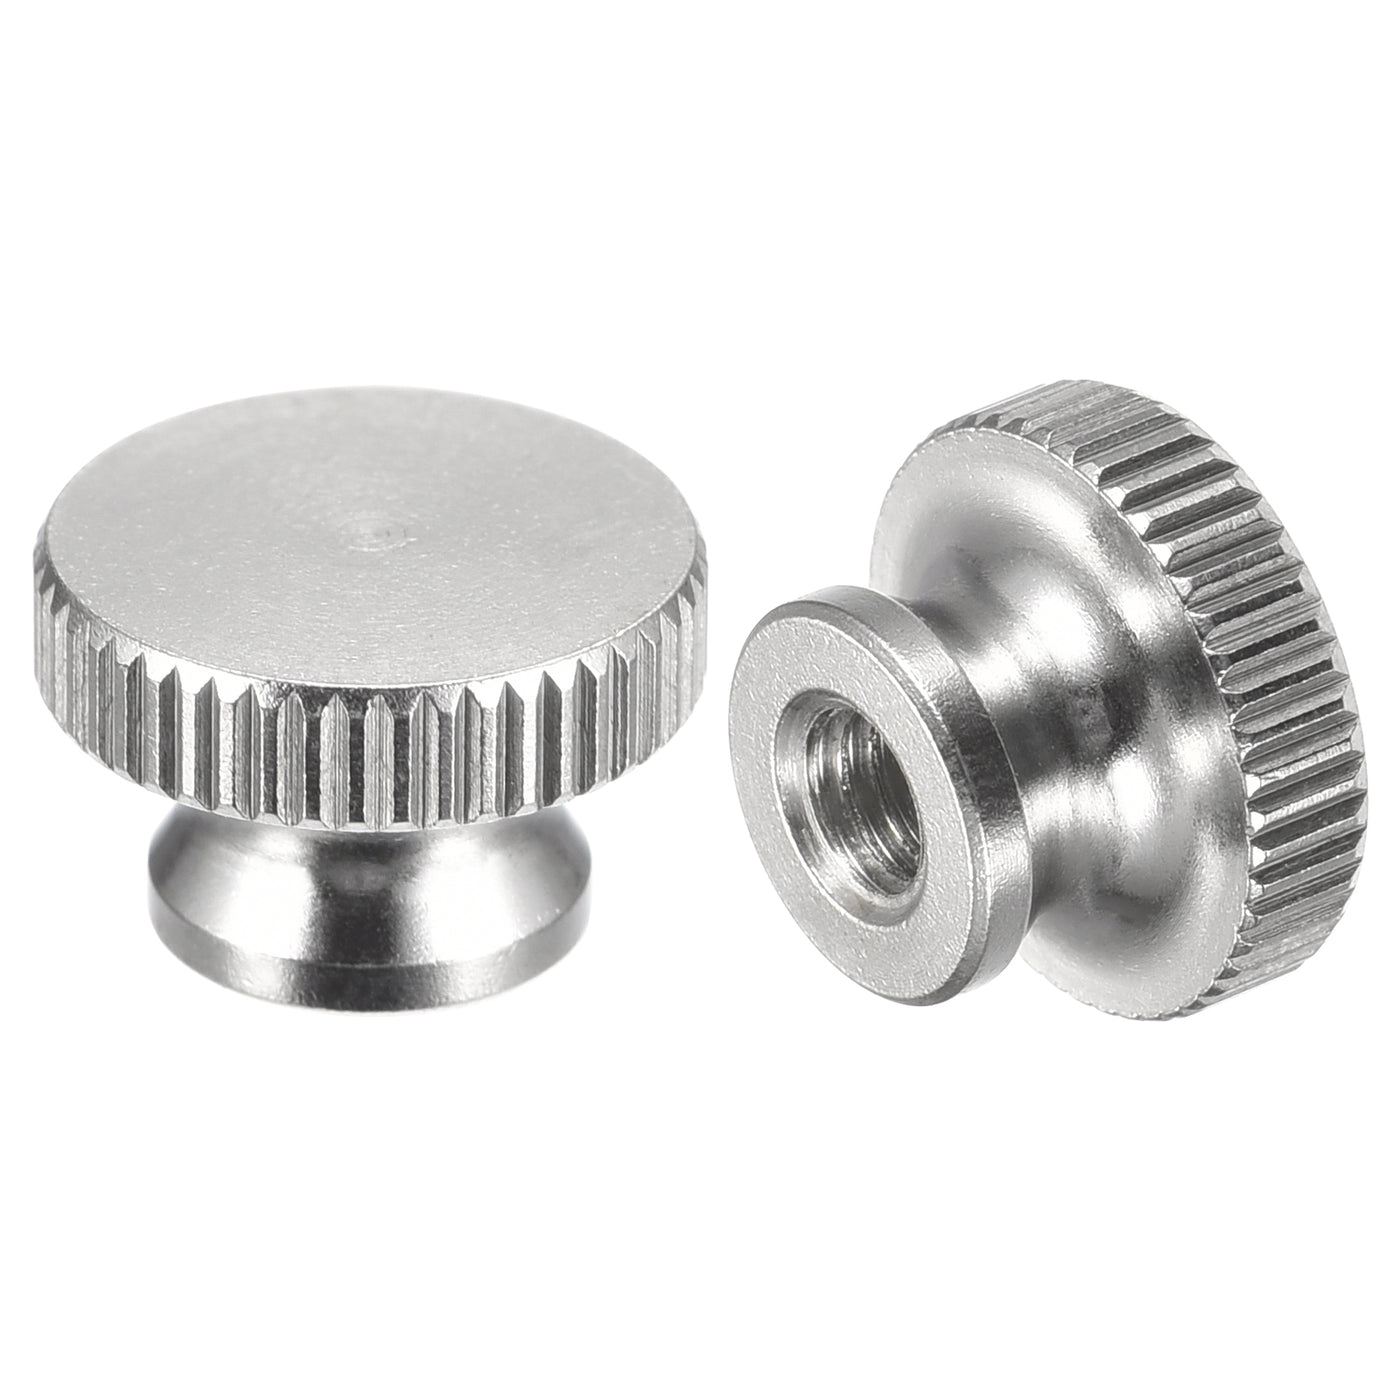 uxcell Uxcell Knurled Thumb Nuts, 2pcs M4 x D12mm x H8mm 304 Stainless Steel Blind Hole Nuts